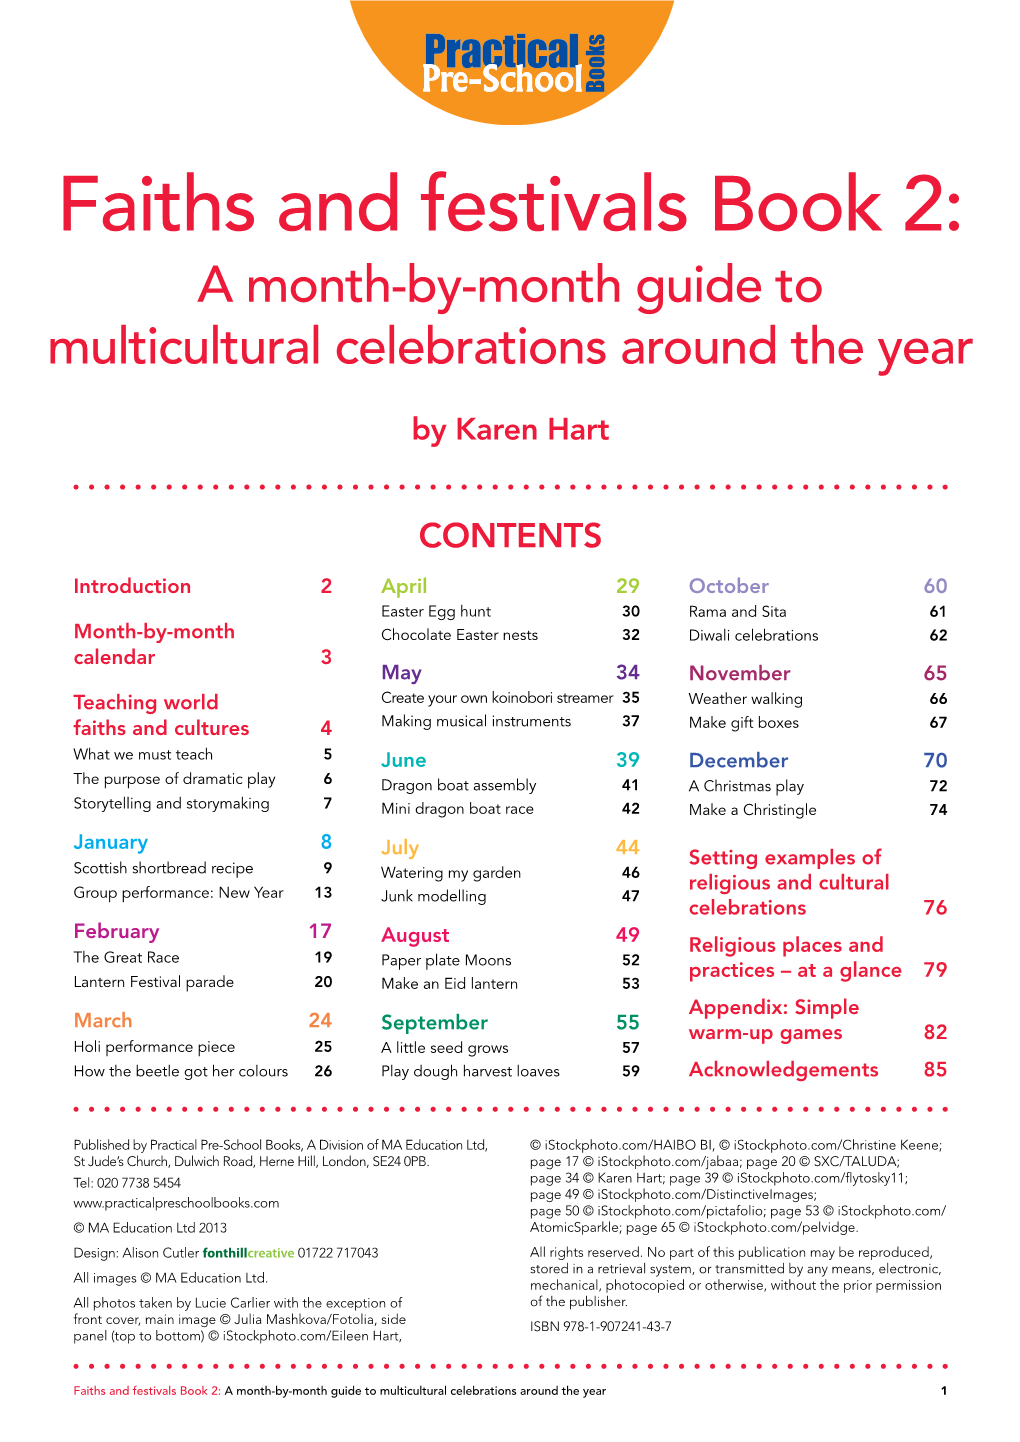 Faiths and Festivals Book 2: a Month-By-Month Guide to Multicultural Celebrations Around the Year